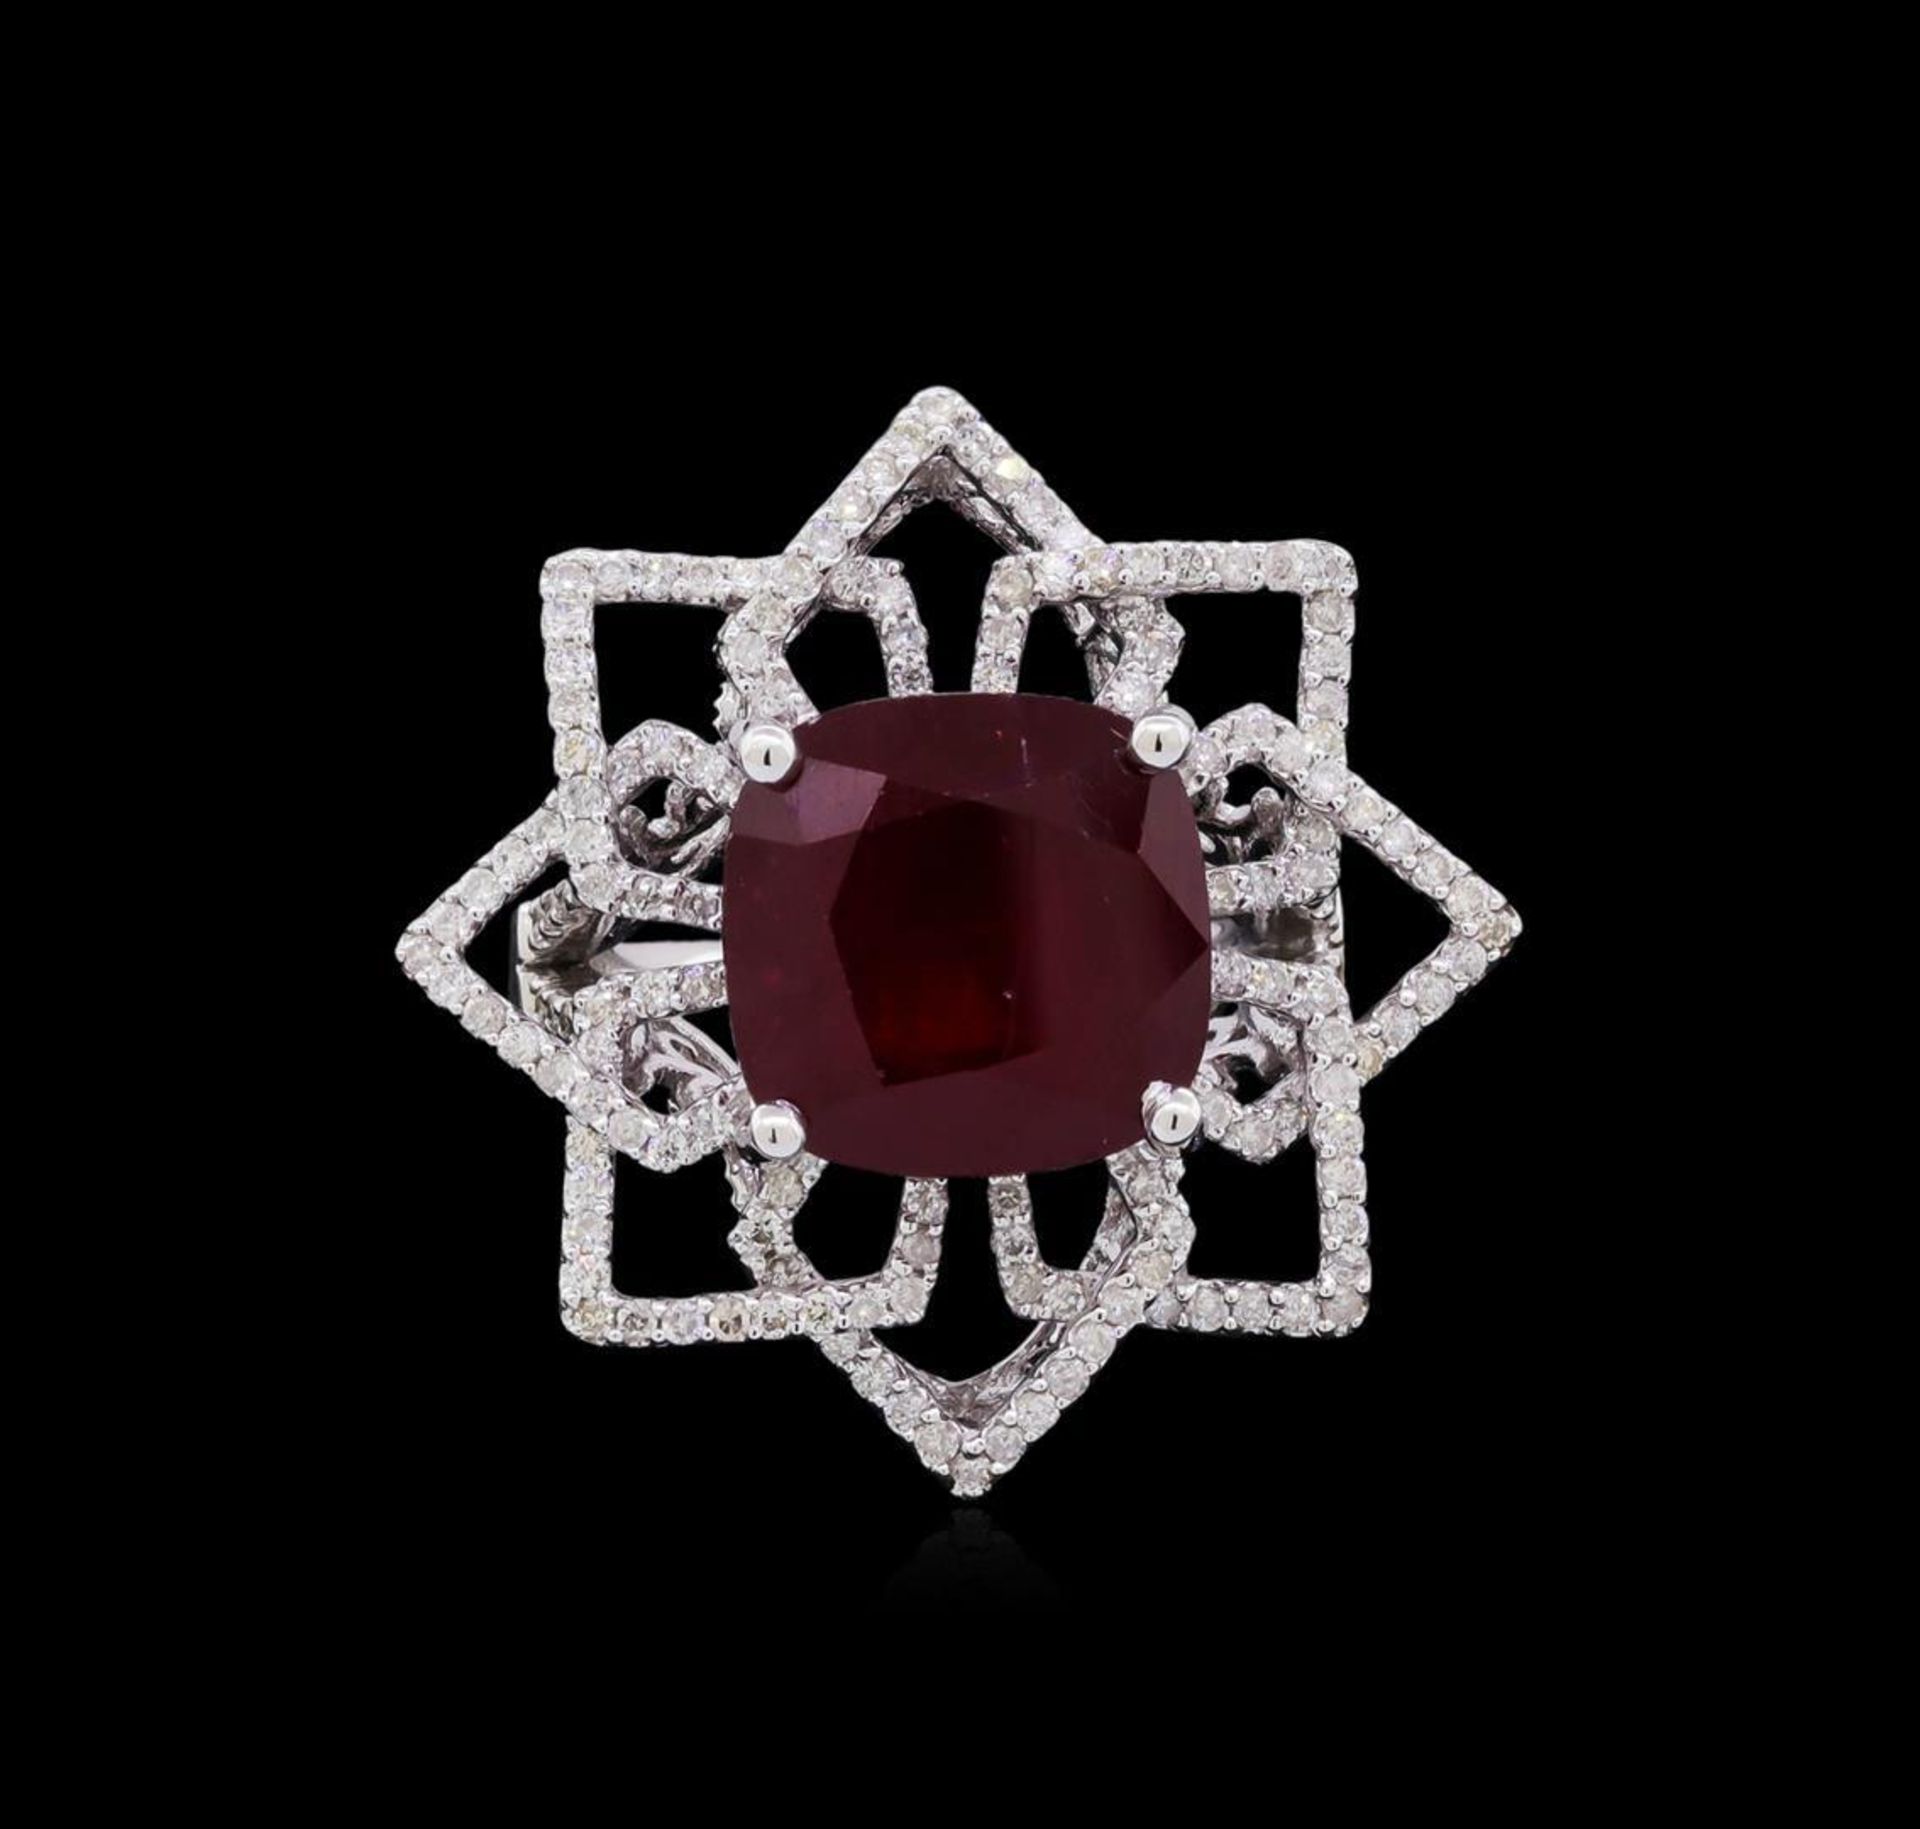 14KT White Gold 11.02 ctw Ruby and Diamond Ring - Image 2 of 5